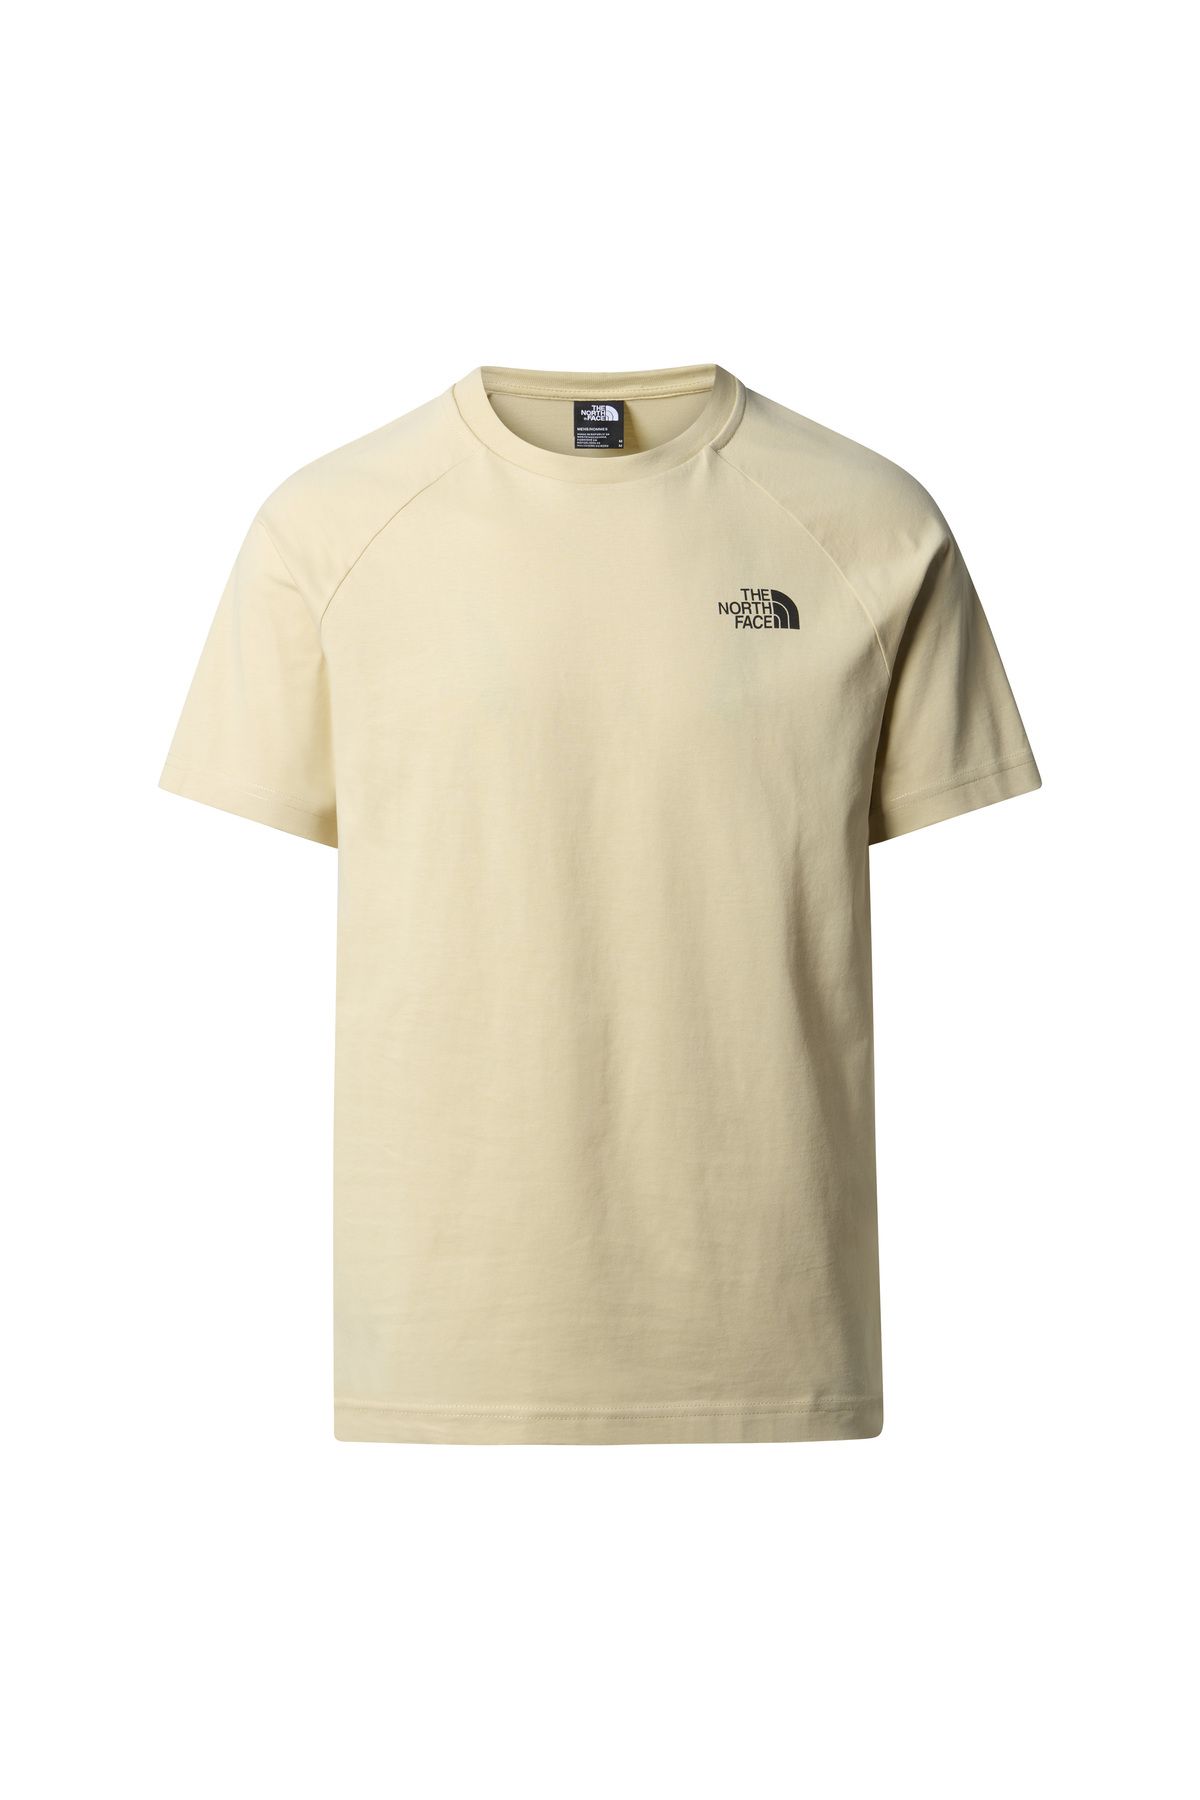 The North Face M S/s North Faces Tee Erkek Bej Tshirt Nf0a87nu3x41